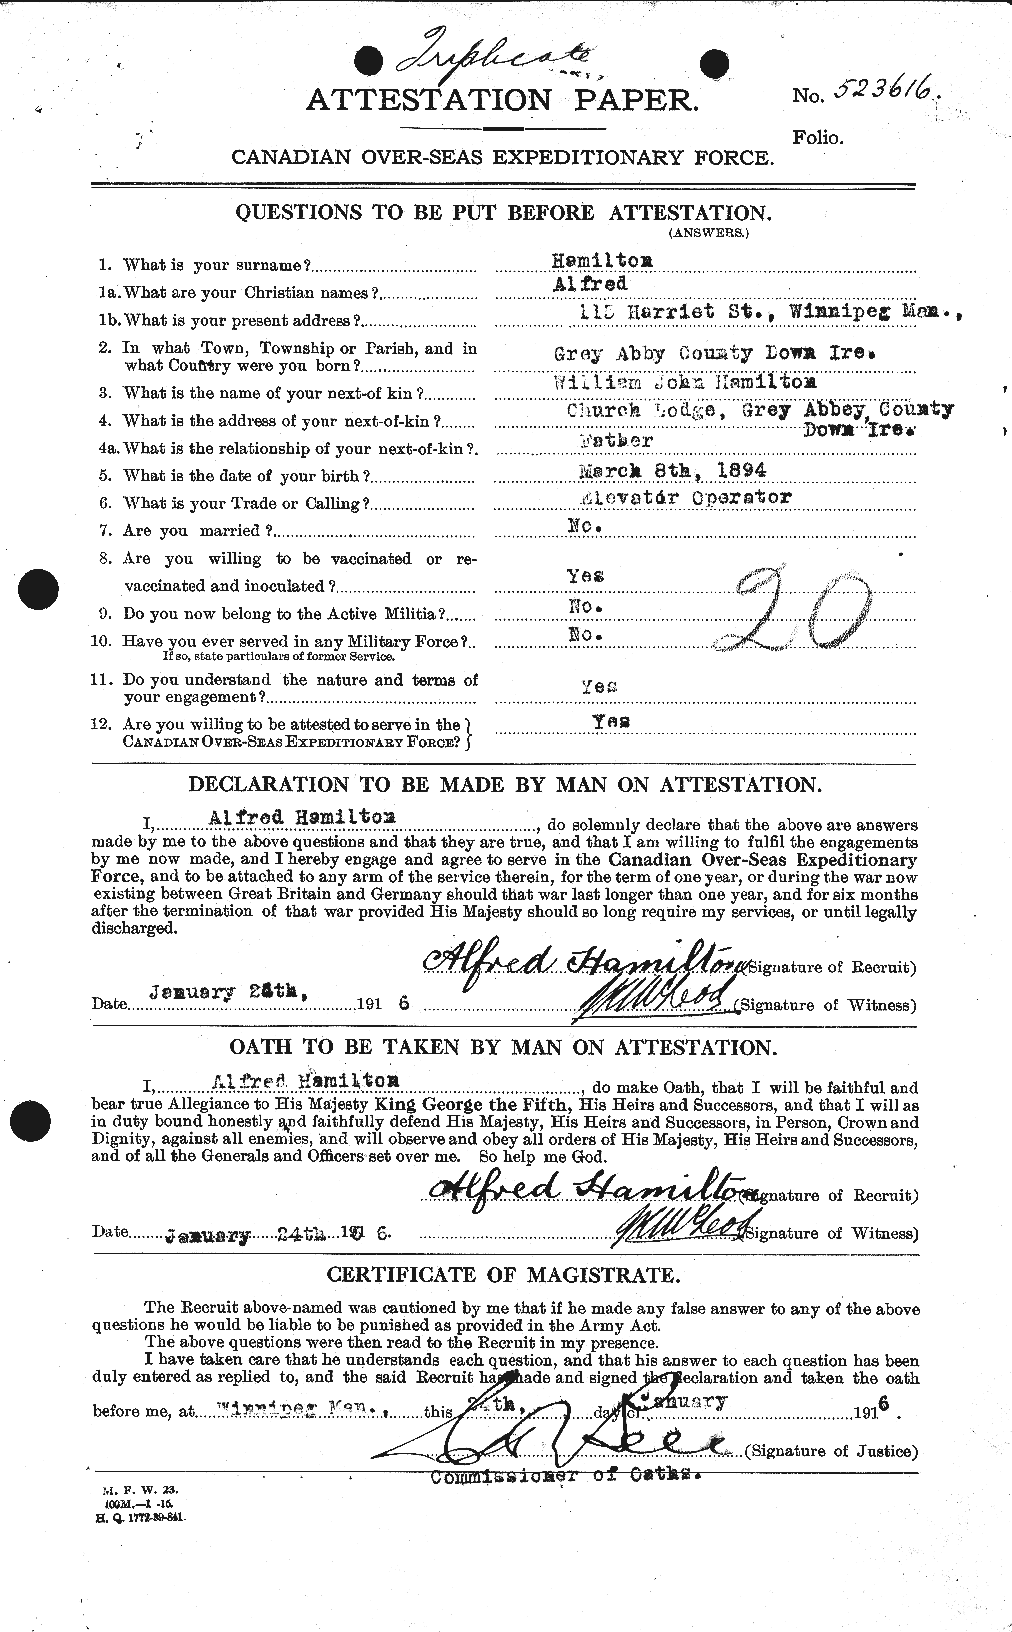 Personnel Records of the First World War - CEF 375212a